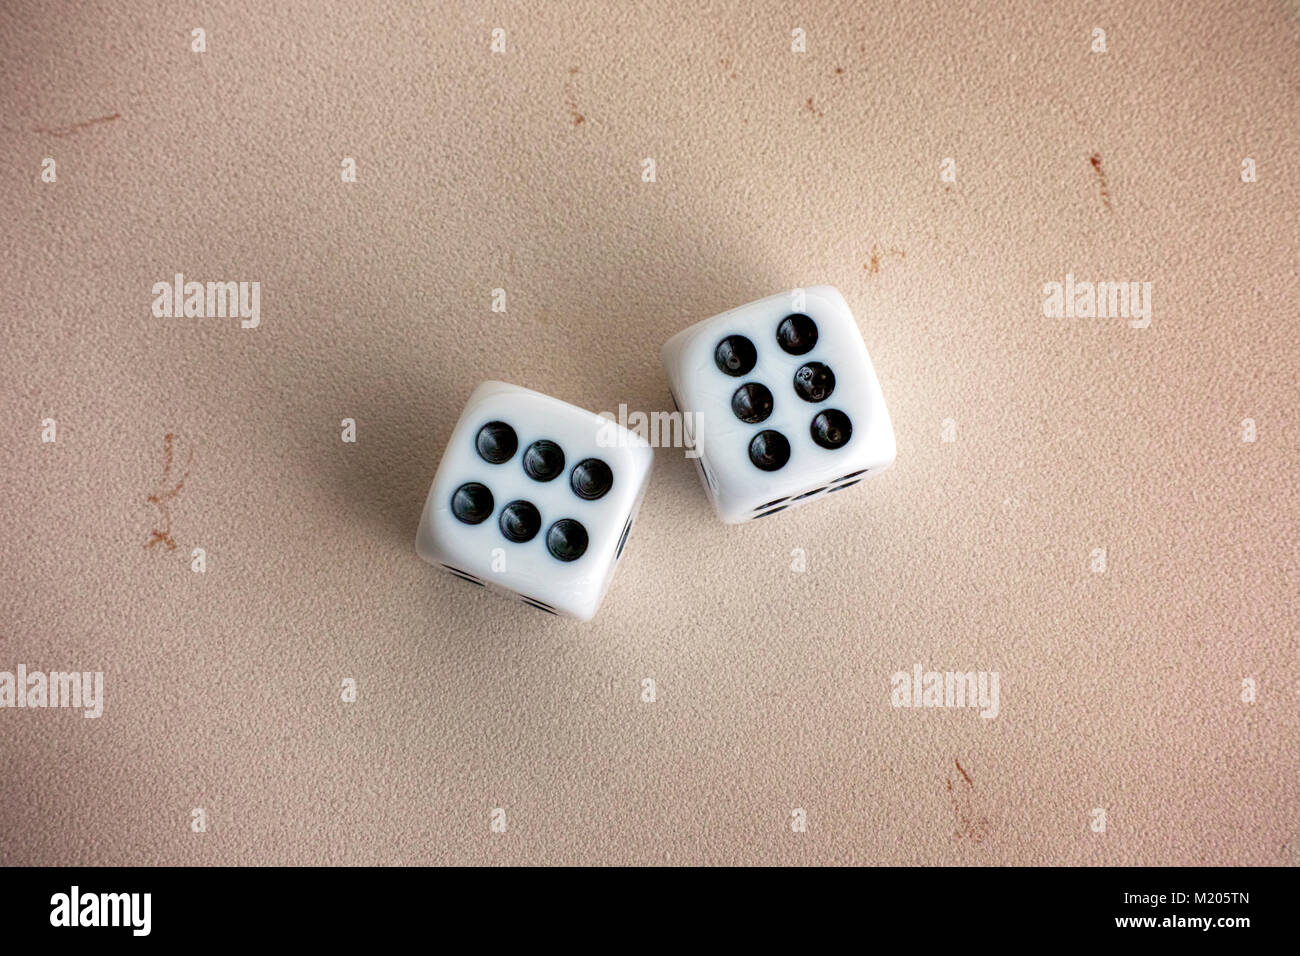 Two dice on stone background. Close-up. Stock Photo